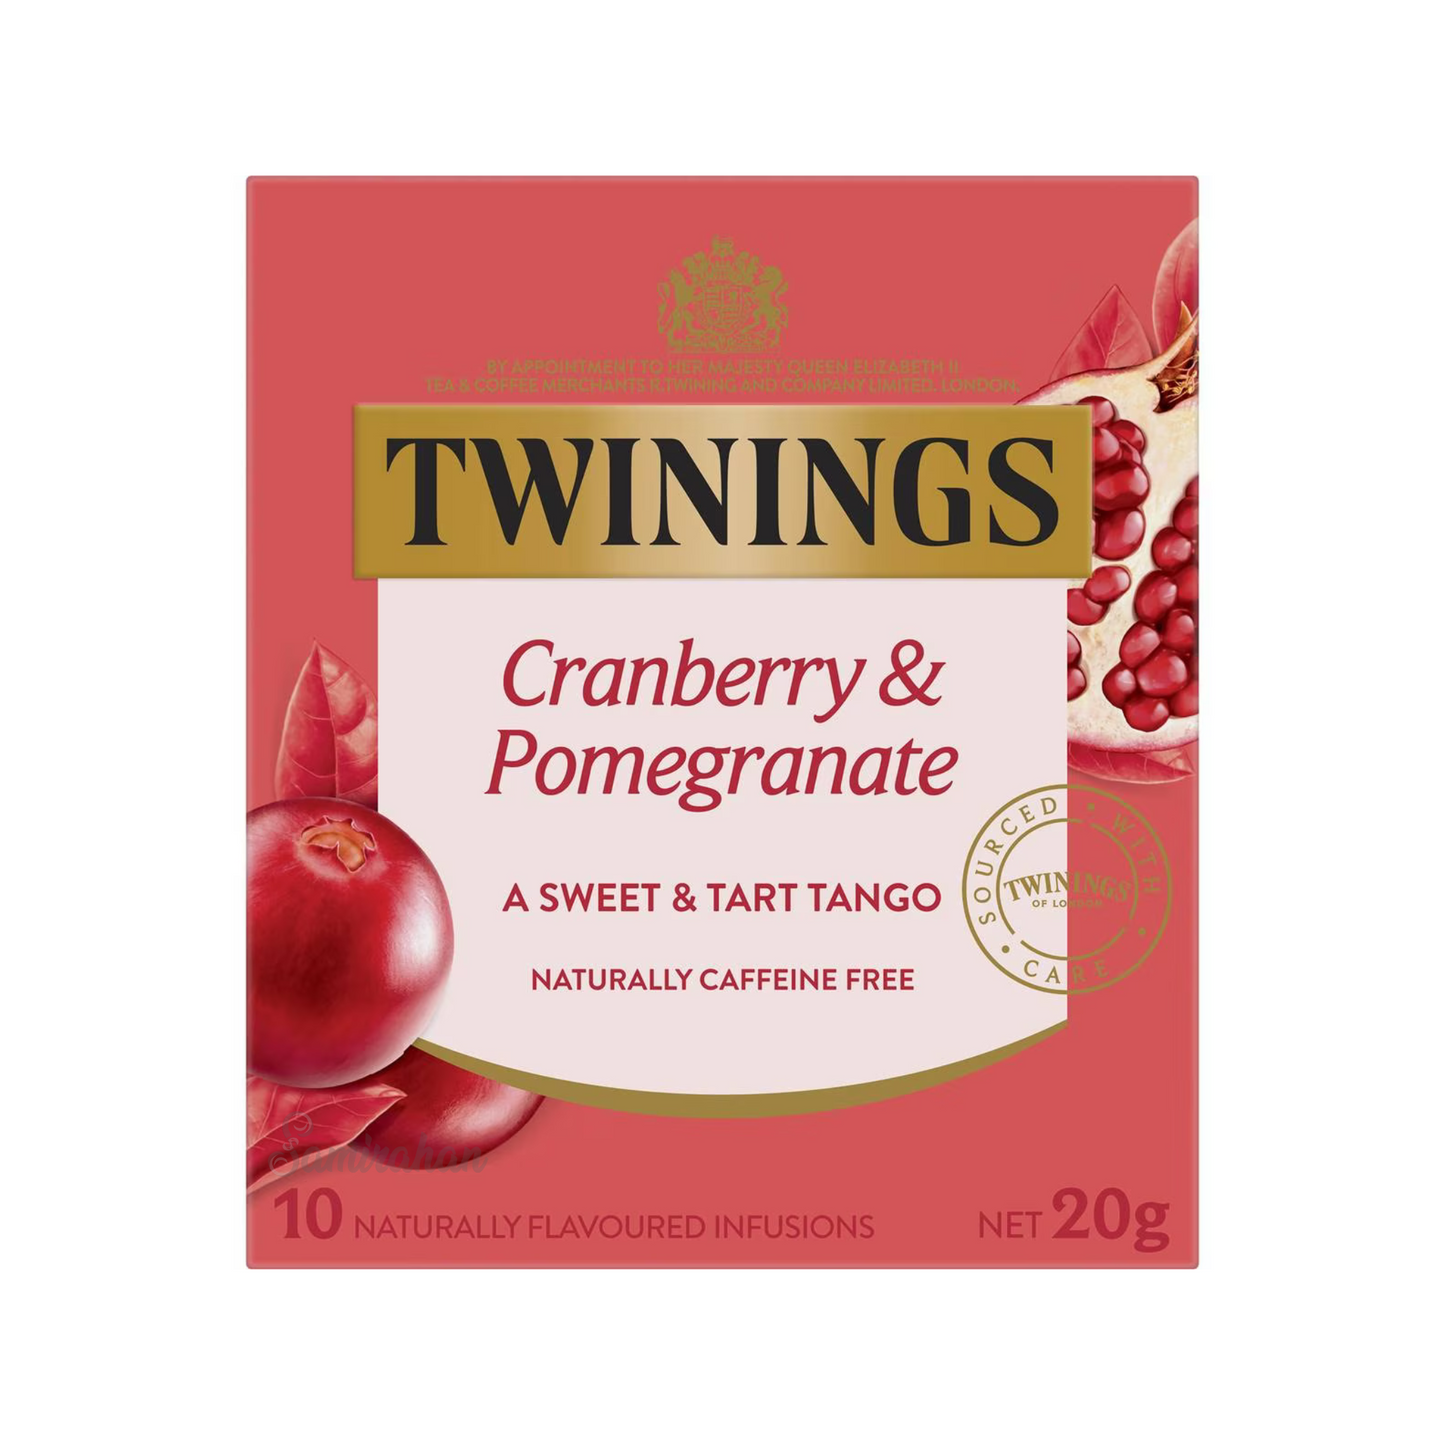 Twinings Cranberry & Pomegranate is vibrant & rich. Enjoy every day. A match made in flavour heaven. Best genuine authentic foreign imported real Australian British UK instant strong delicious premium luxury quality original tasty infused infusion tea bag cheap price in Dhaka Chittagong Sylhet Rajshahi Bangladesh.